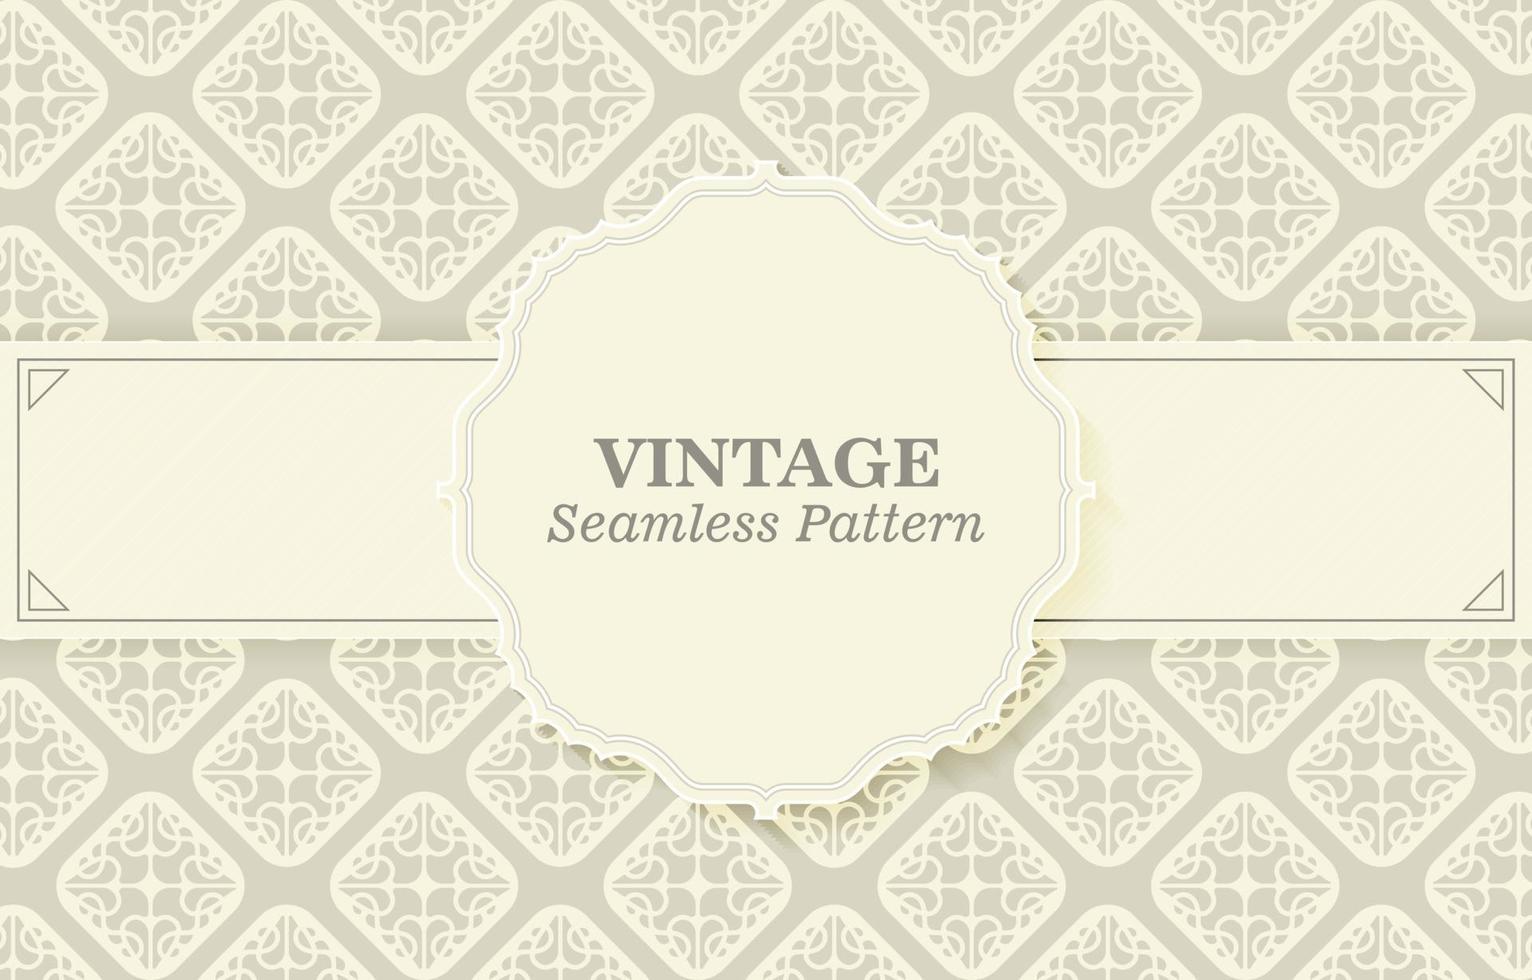 Vintage With Ornament pattern Background vector